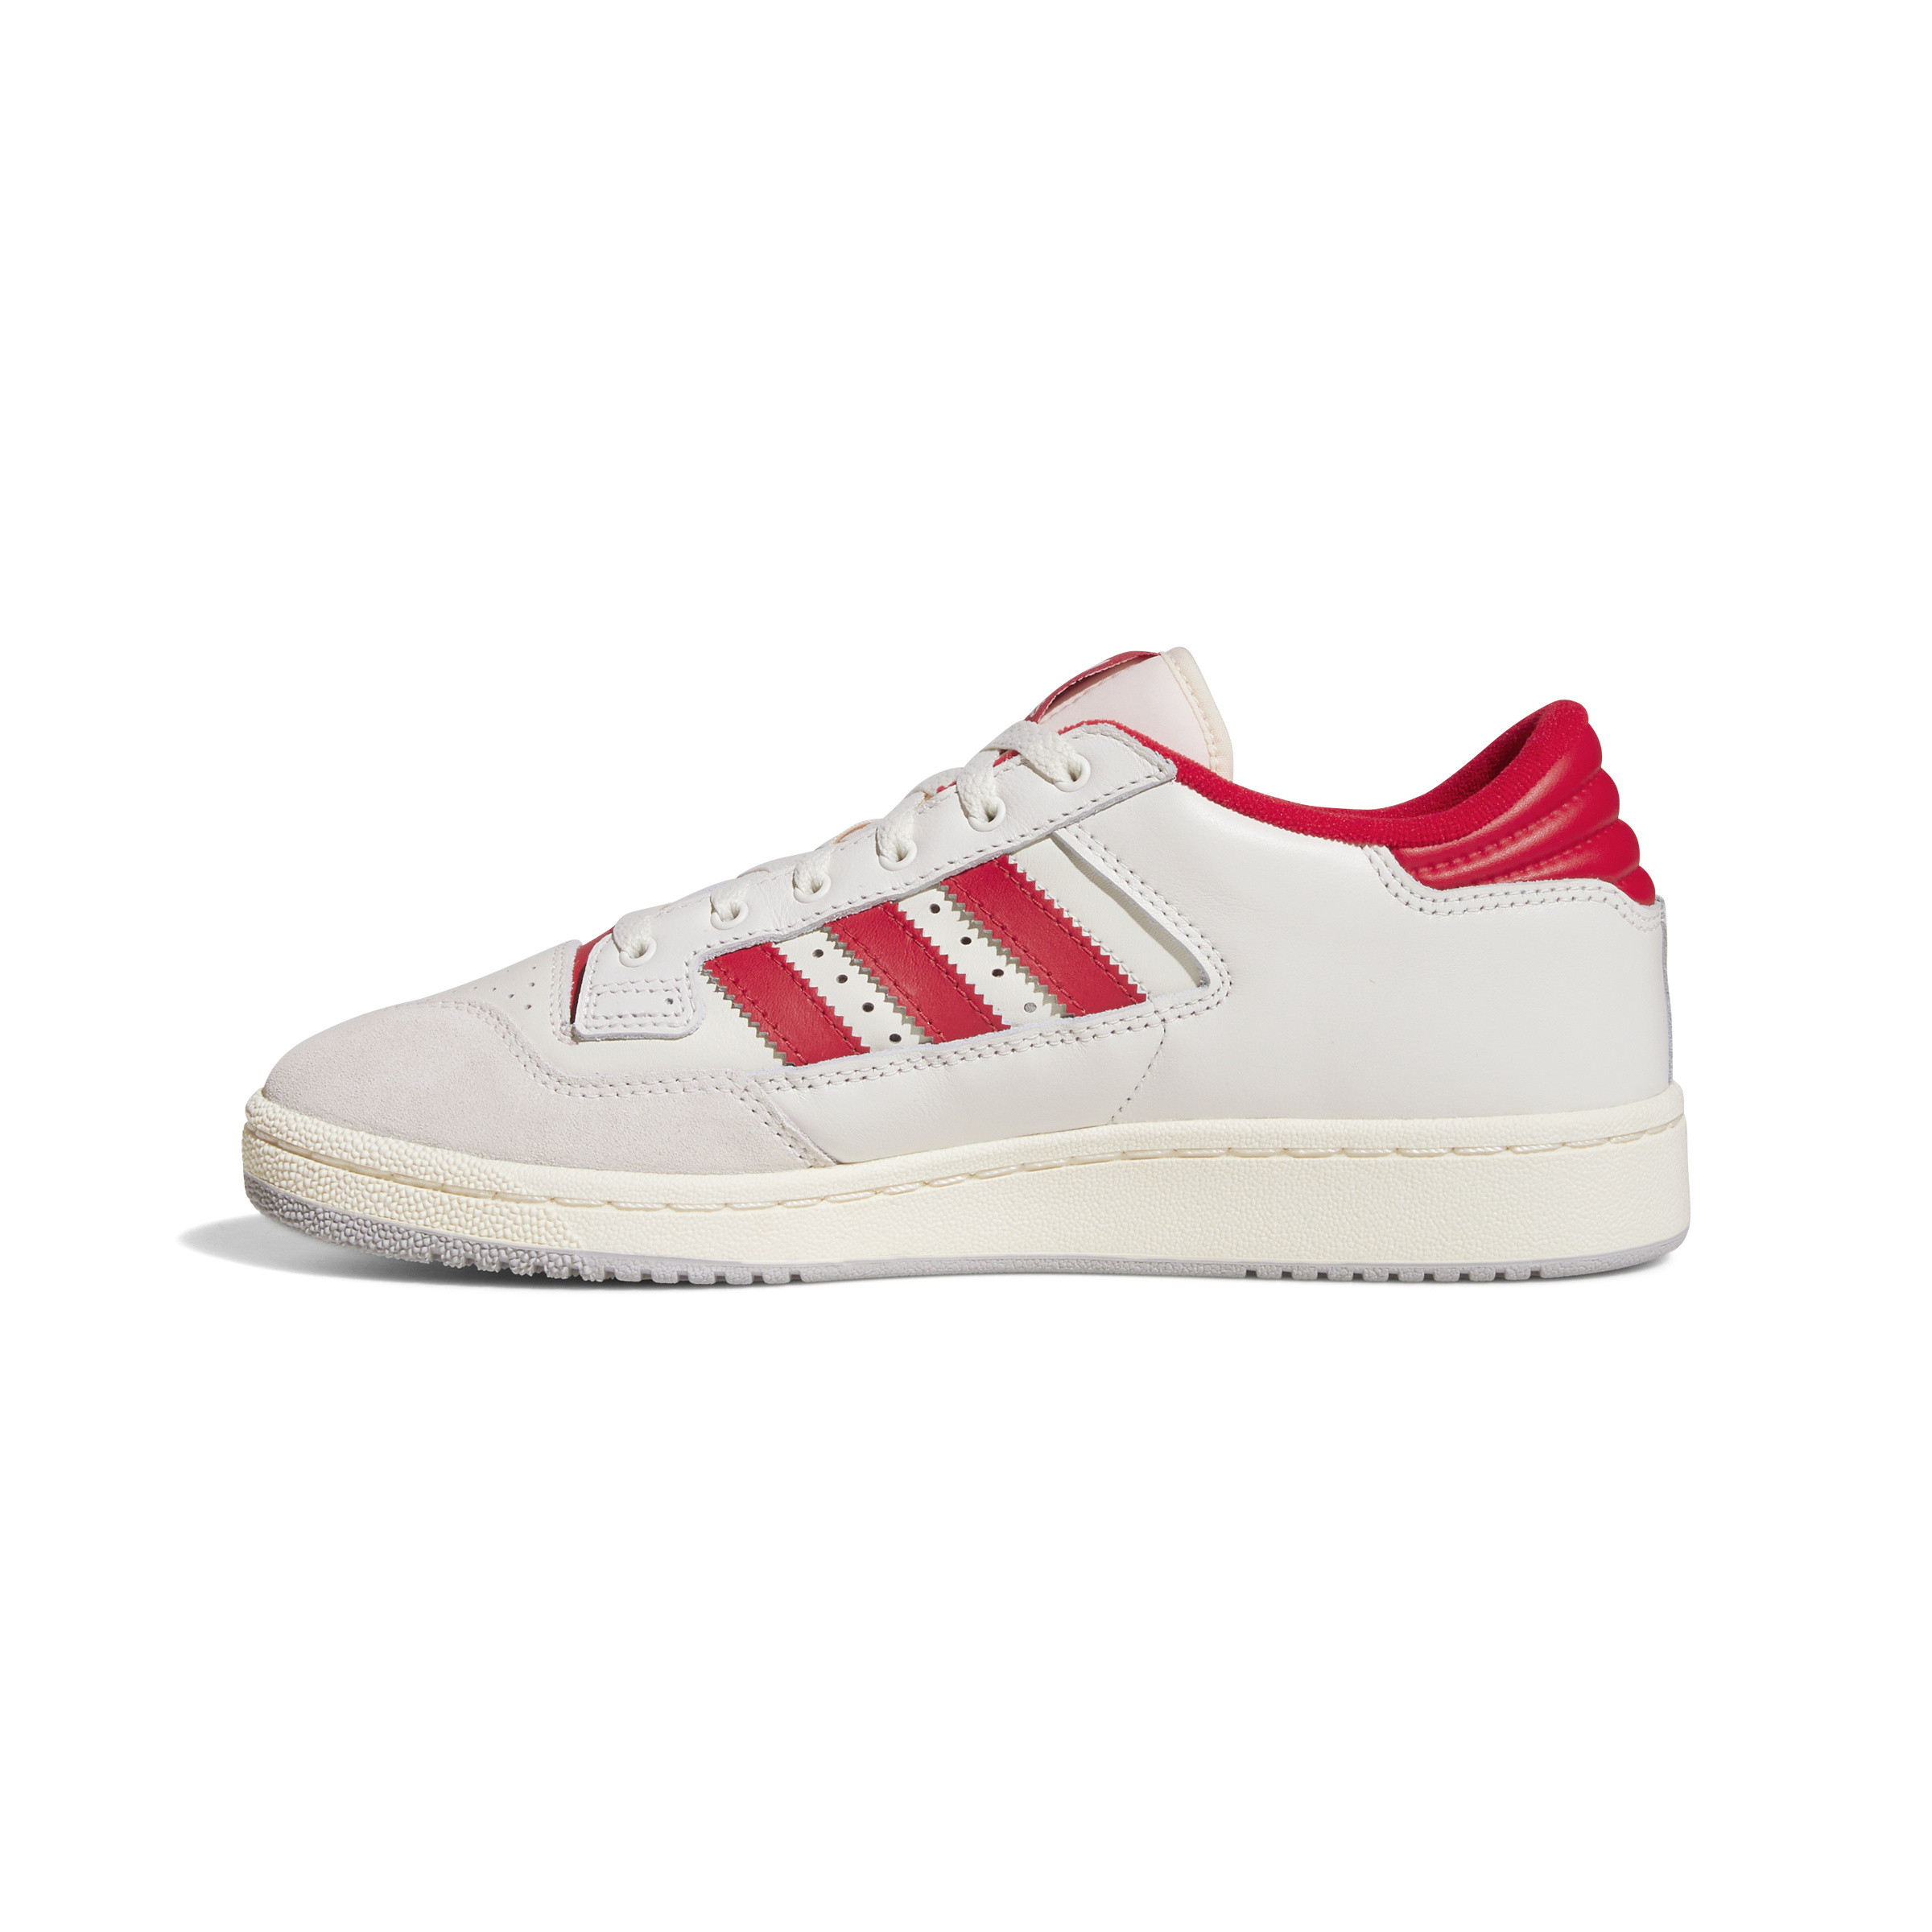 Adidas - Centennial 85 low shoes, White, large image number 1